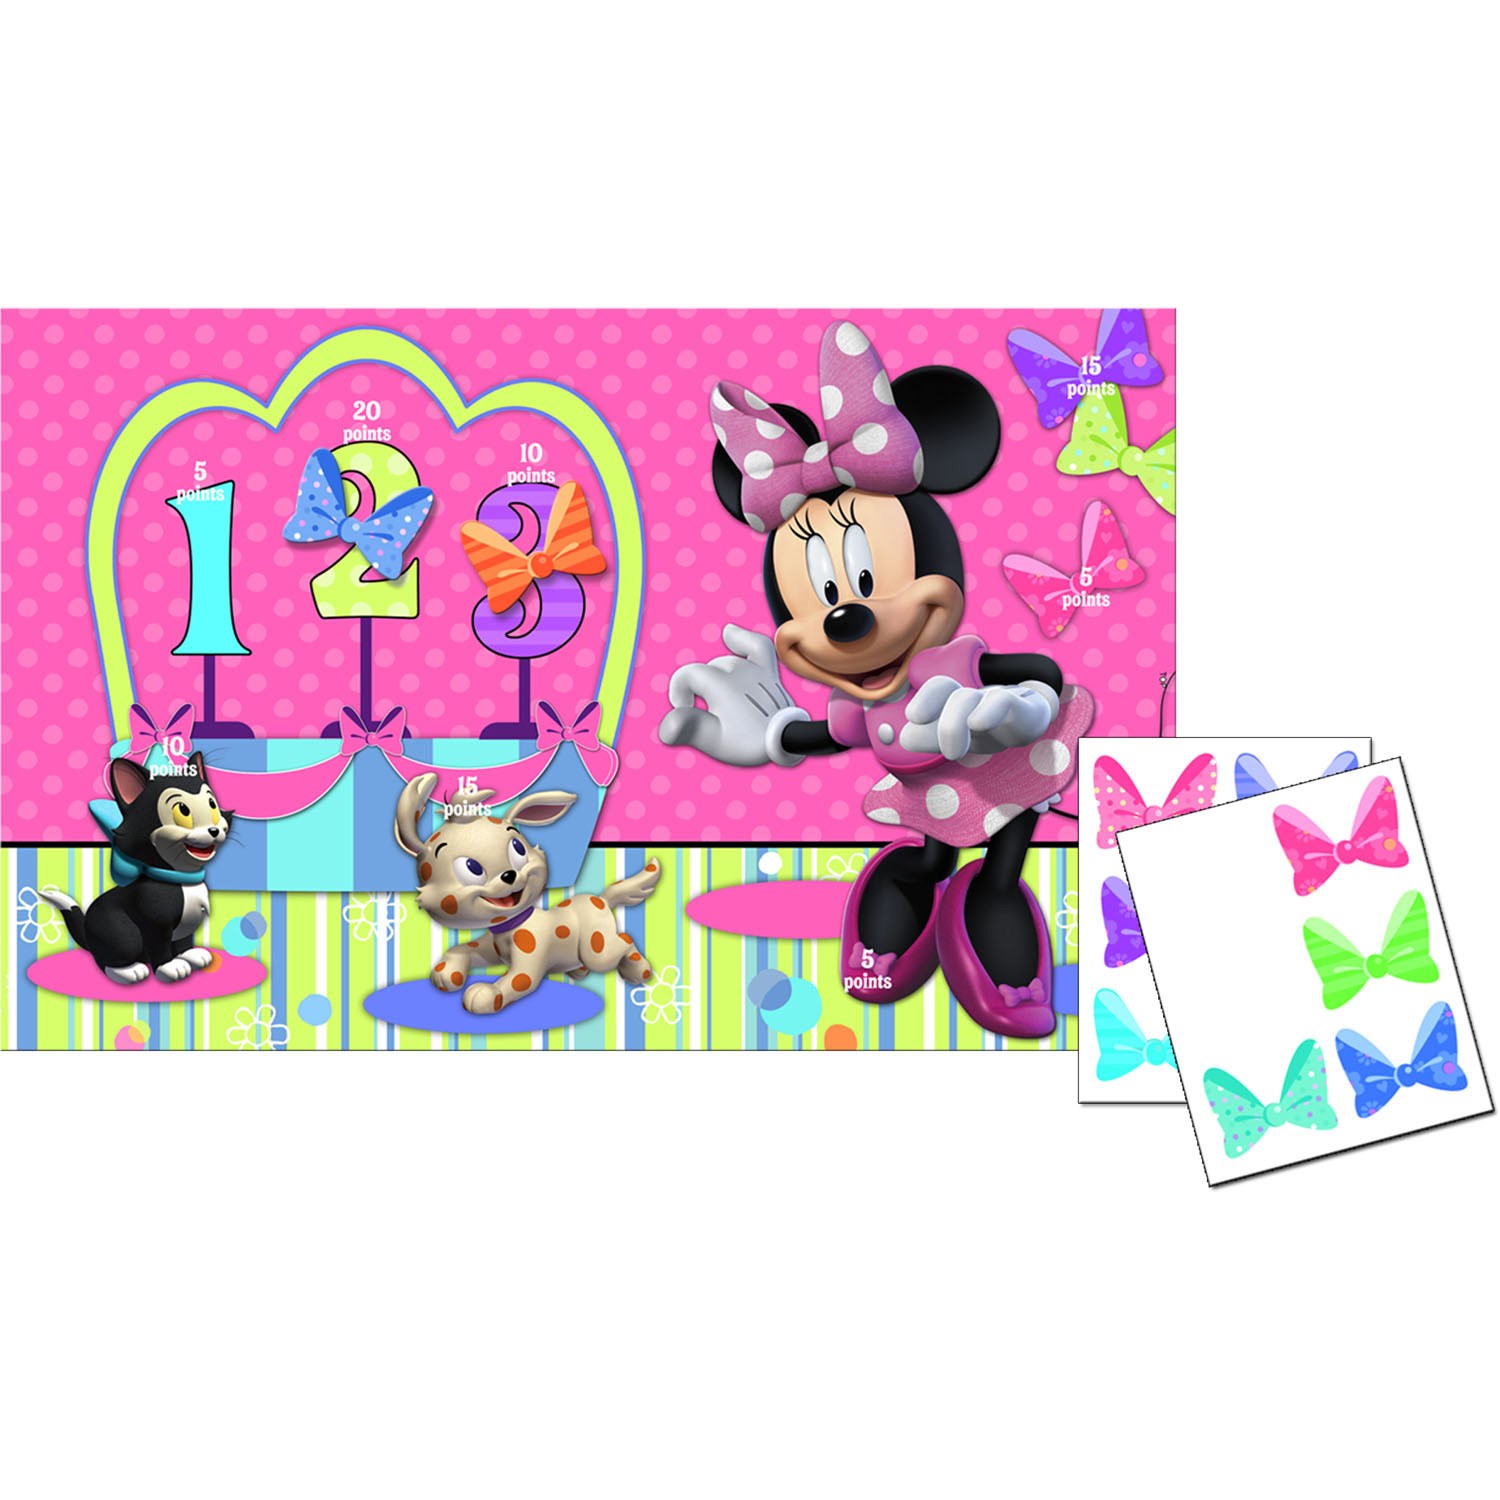 Disney Minnie Mouse Bow-tique Pin the Bow on Minnie Game